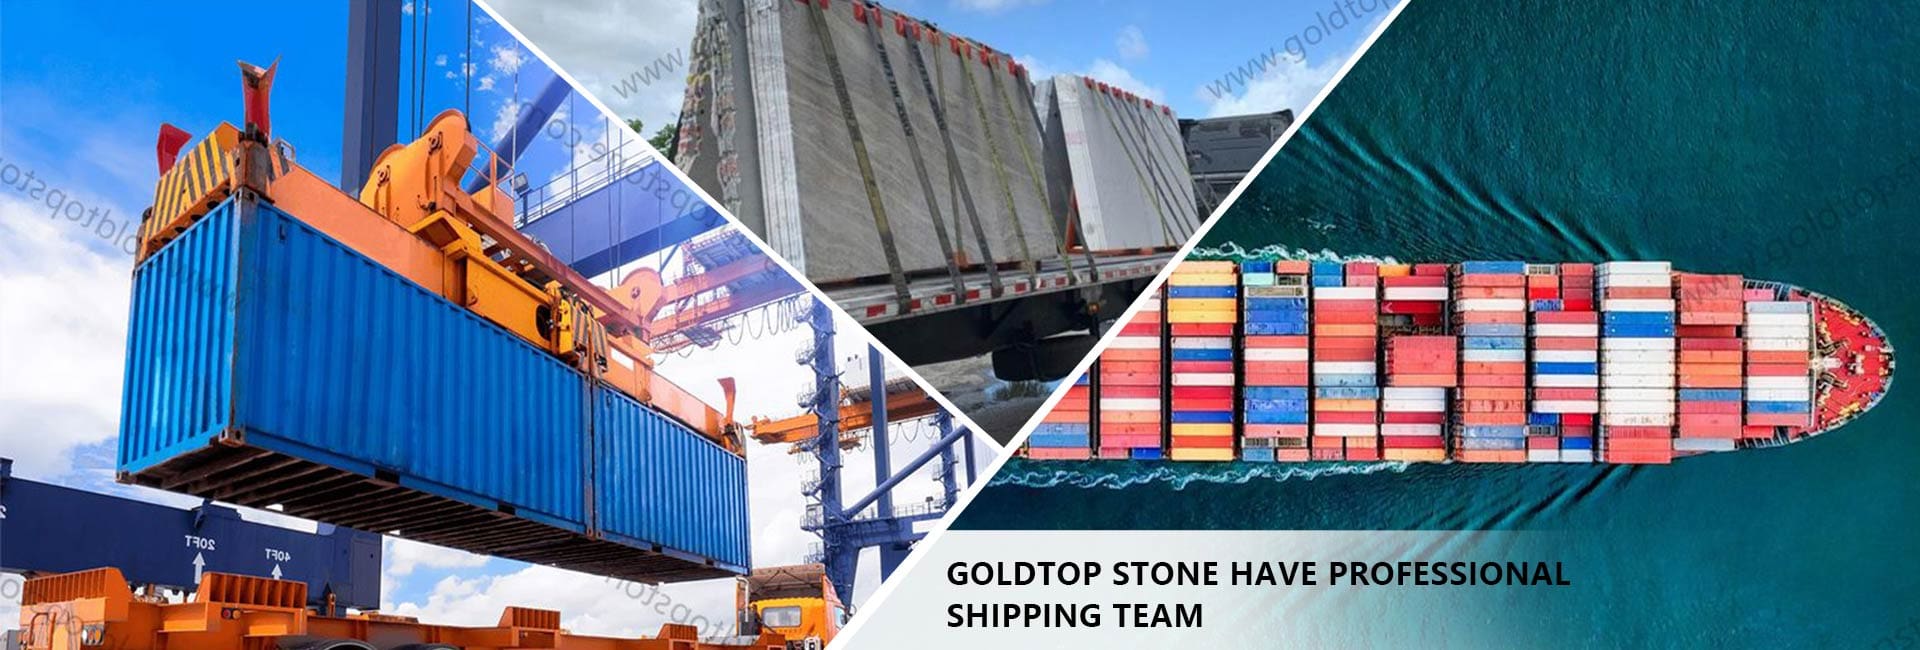 GOLDTOP STONE HAVE PROFESSIONAL SHIPPING TEAM